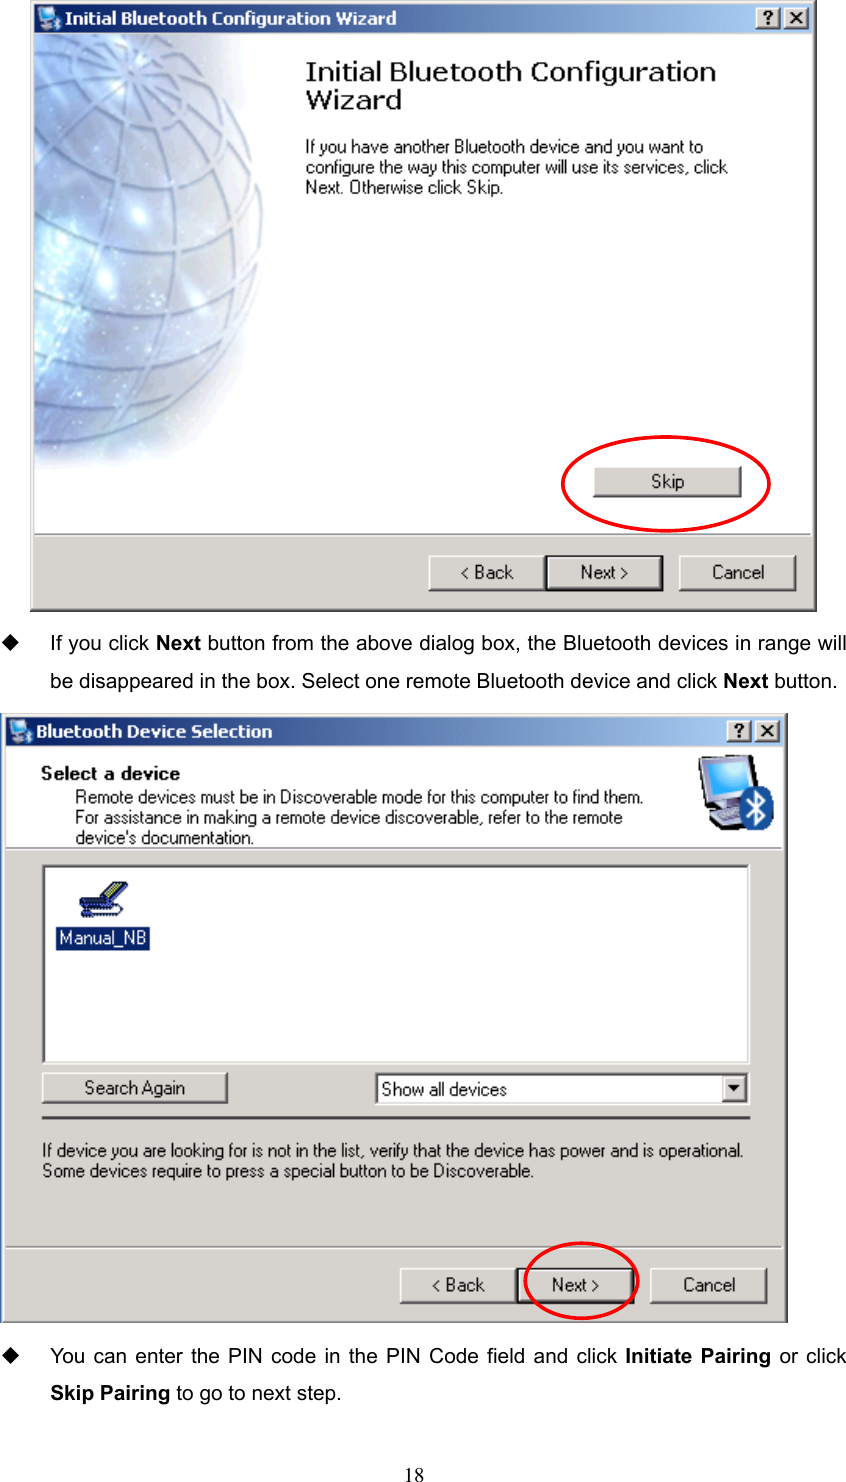    If you click Next button from the above dialog box, the Bluetooth devices in range will be disappeared in the box. Select one remote Bluetooth device and click Next button.    You can enter the PIN code in the PIN Code field and click Initiate Pairing or click Skip Pairing to go to next step.  18 